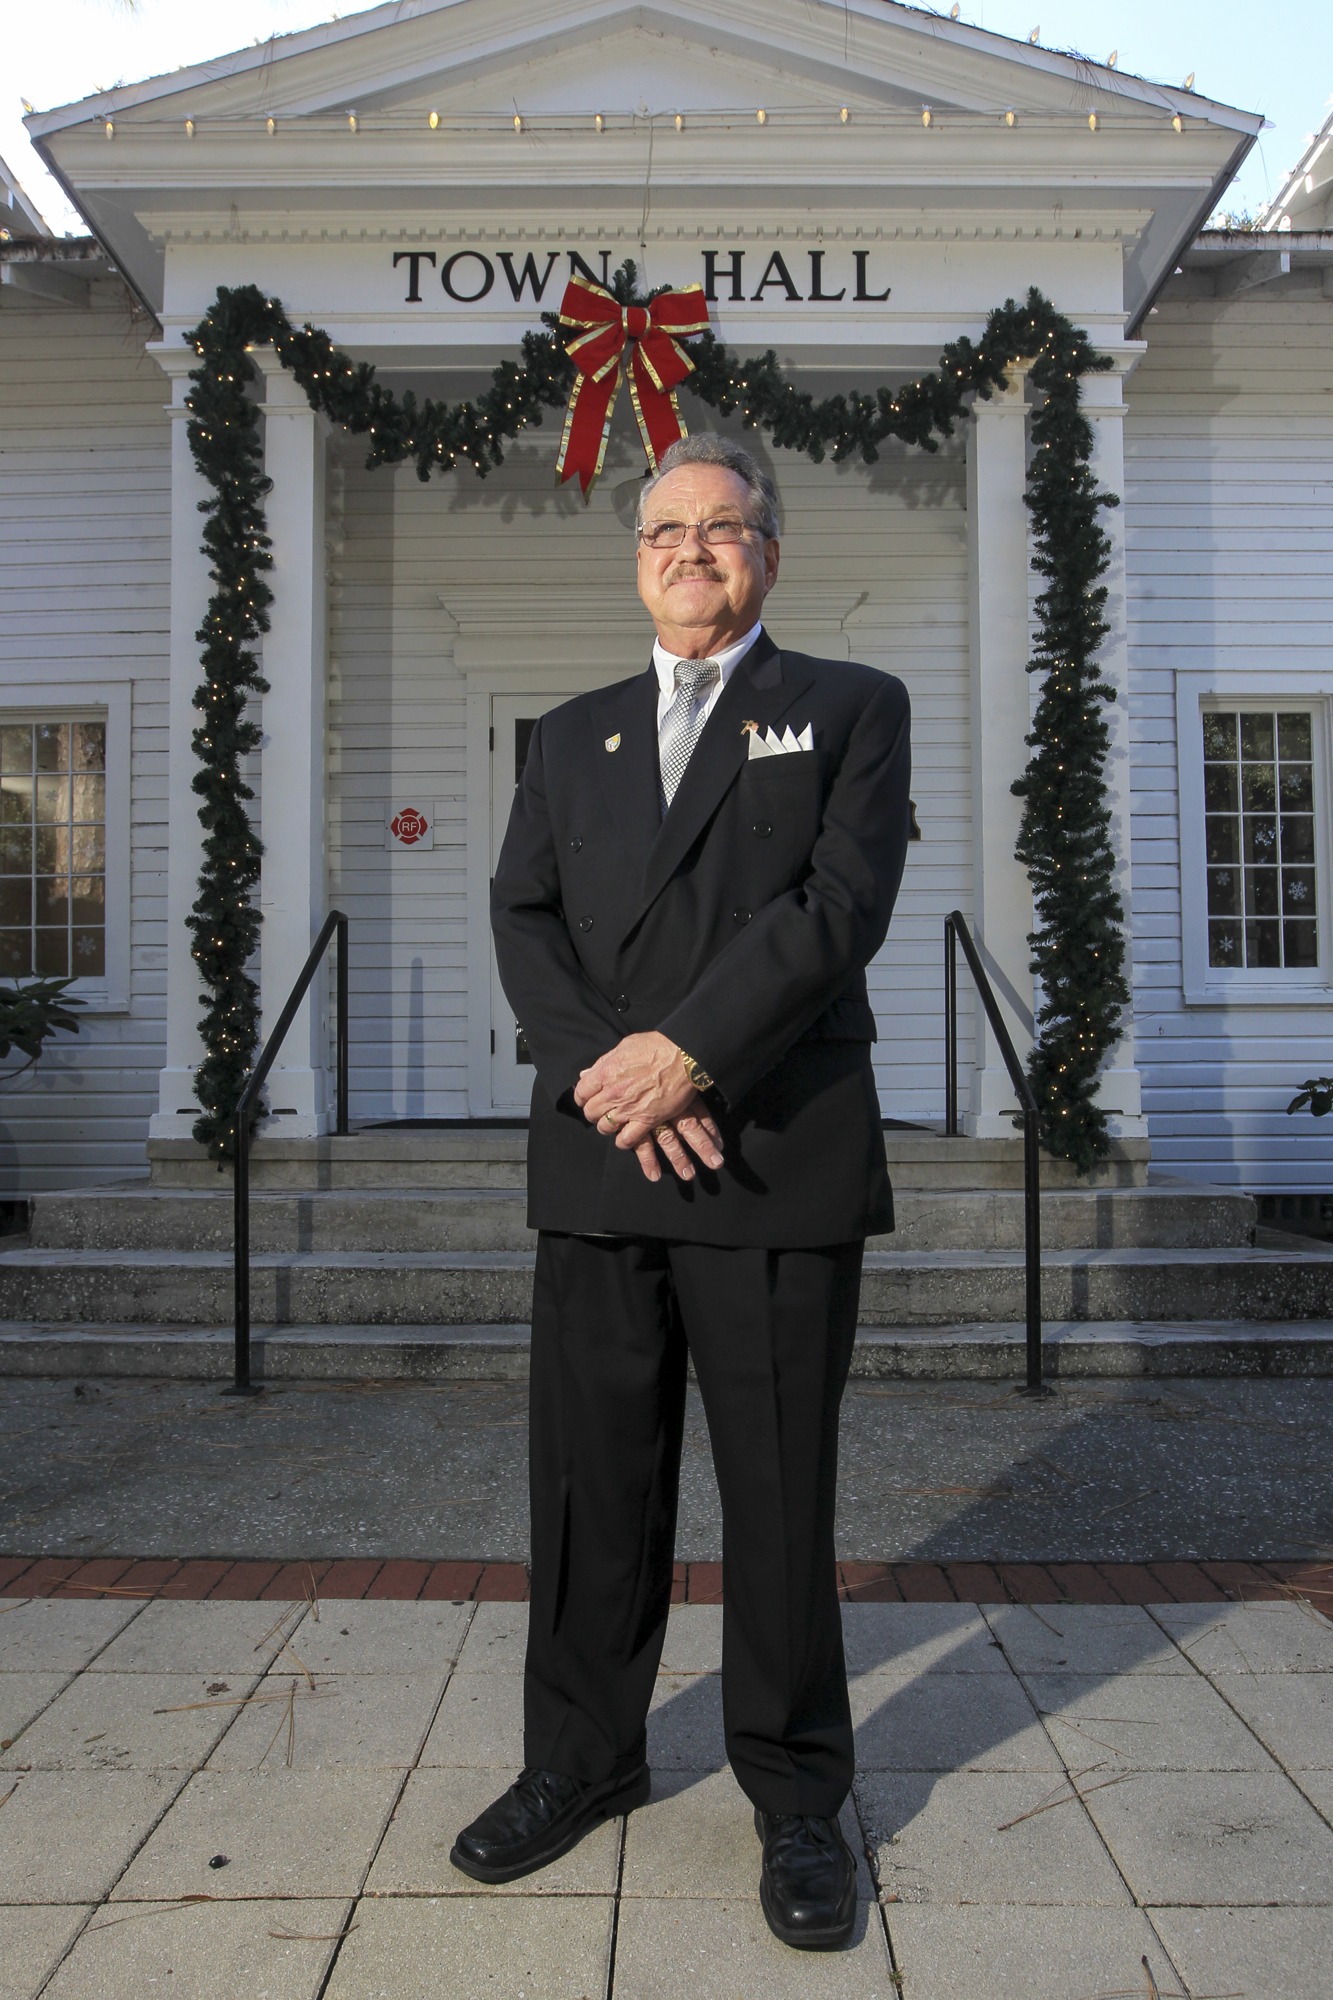 Gary Bruhn has served the town of Windermere since 2004. (Photo by Troy Herring)